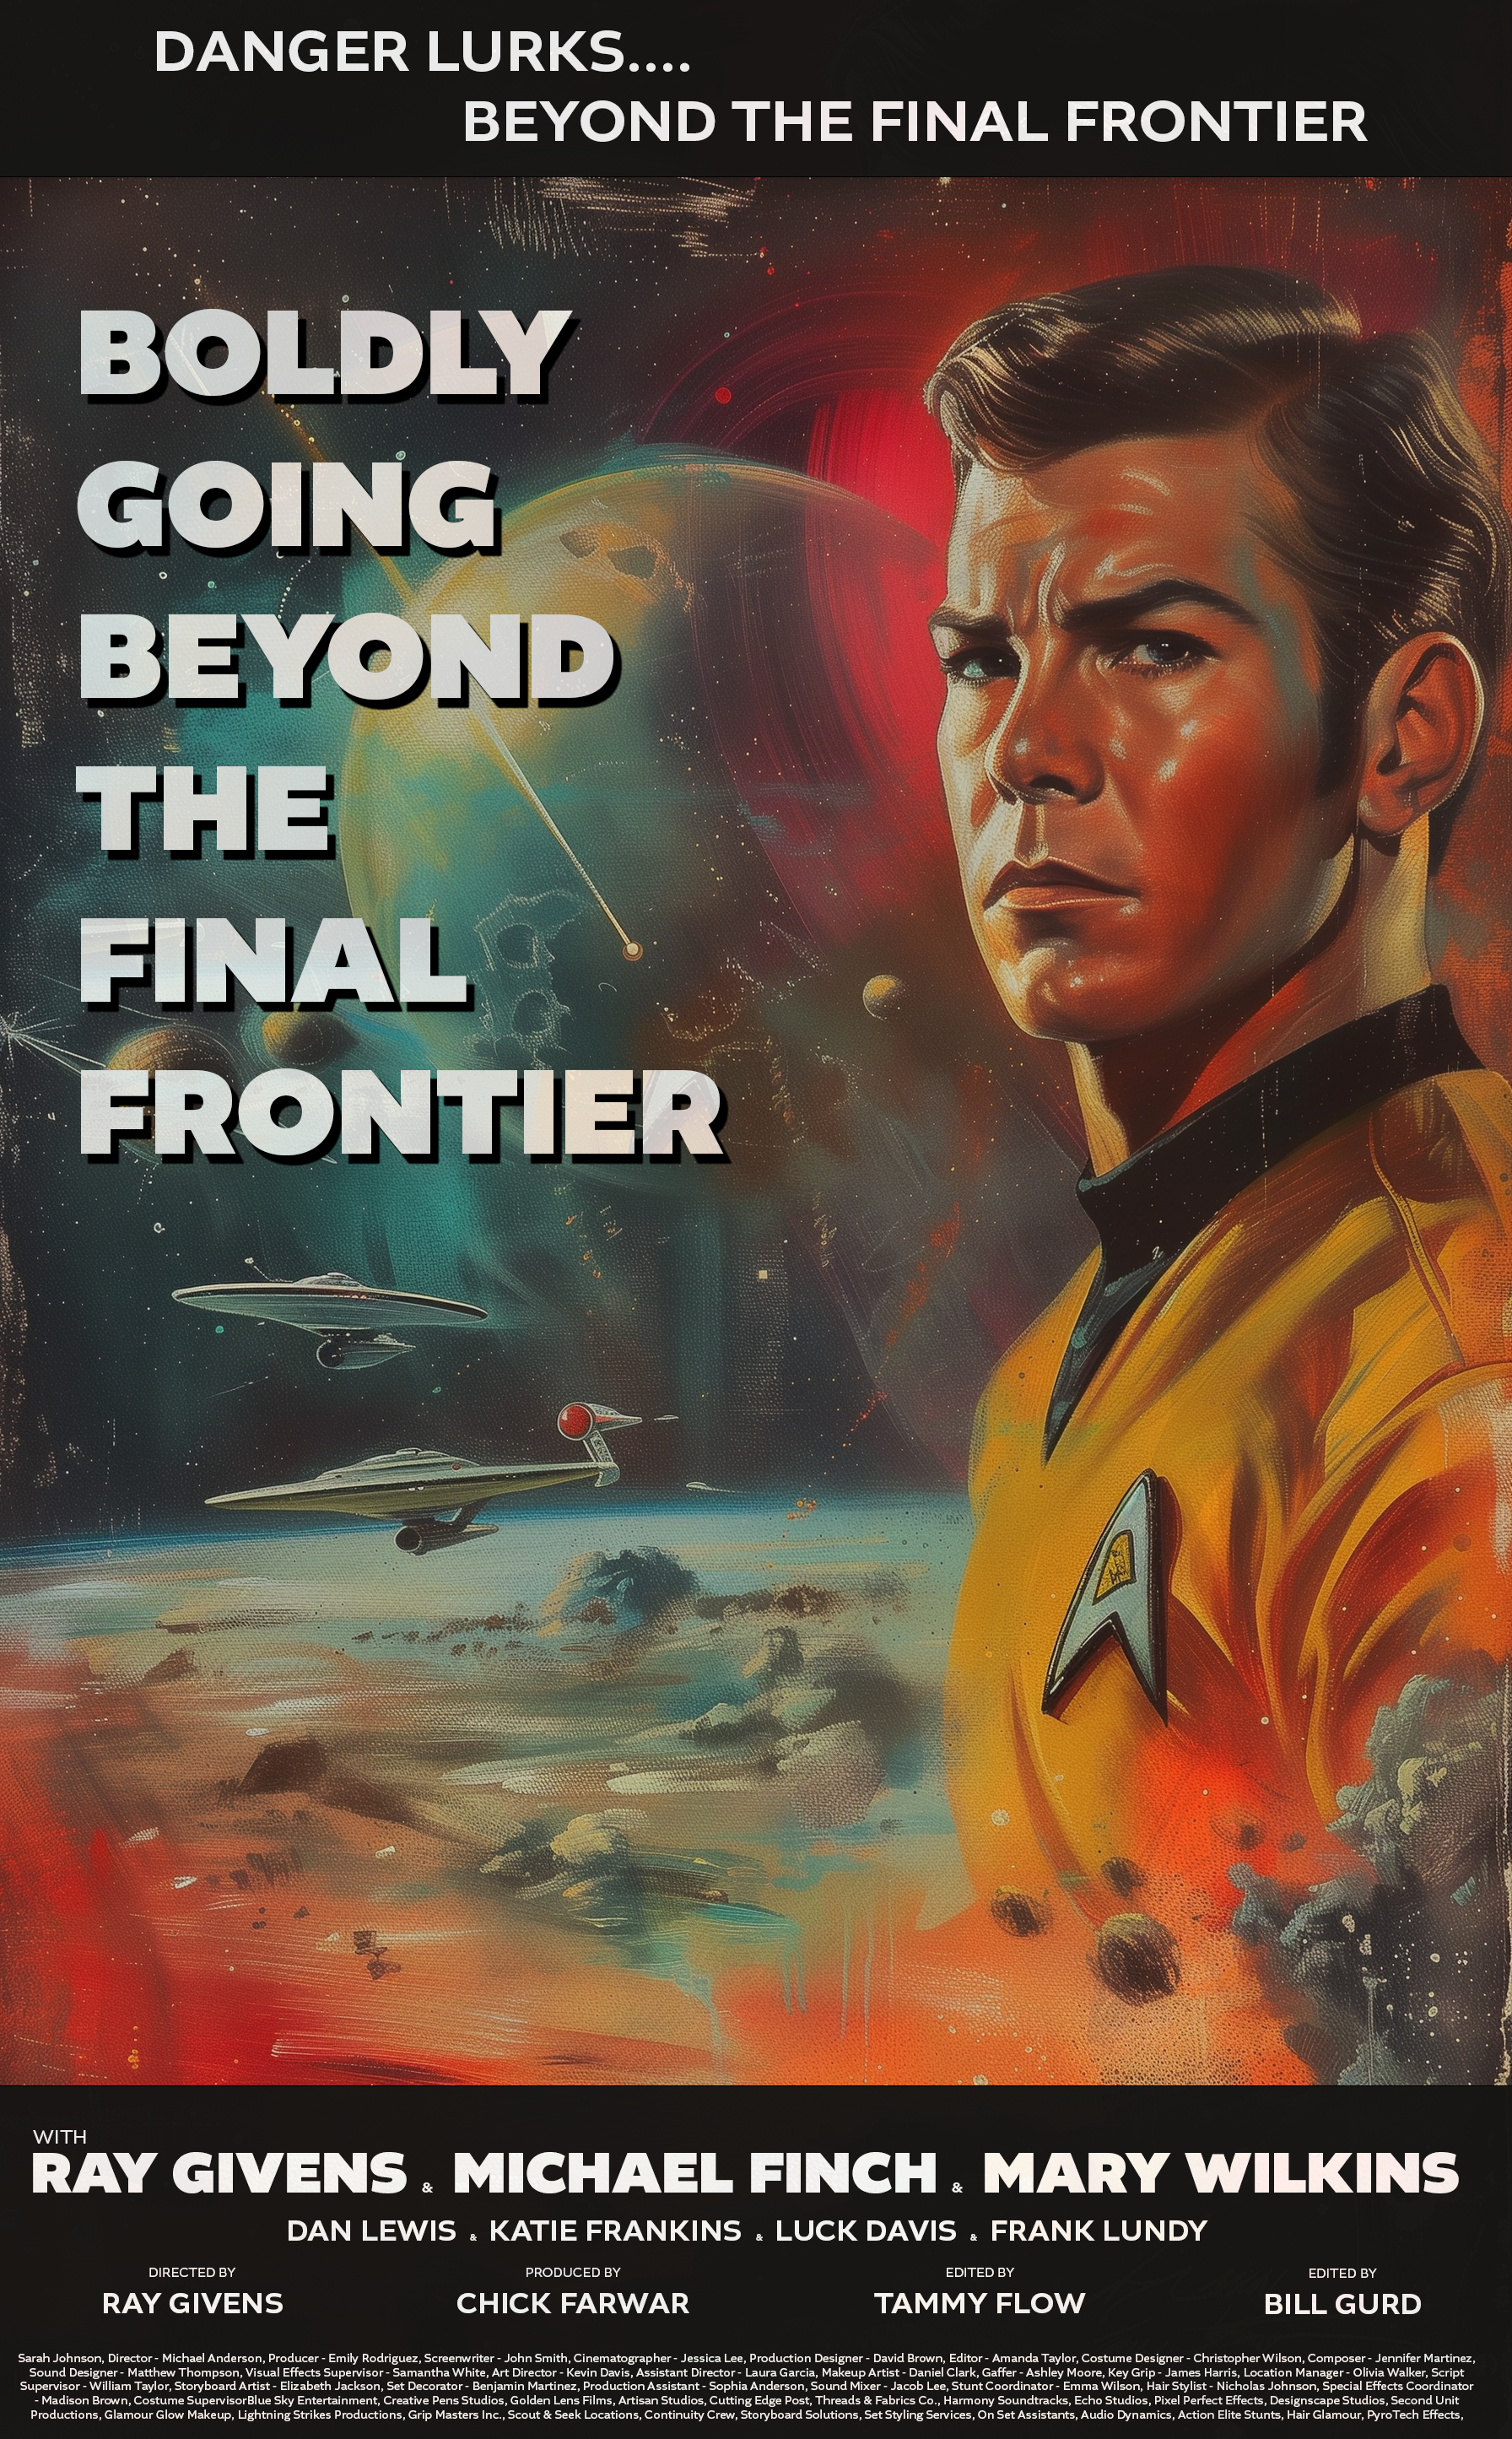 Name:  Beyond the Final Frontier.png
Views: 147
Size:  8.19 MB